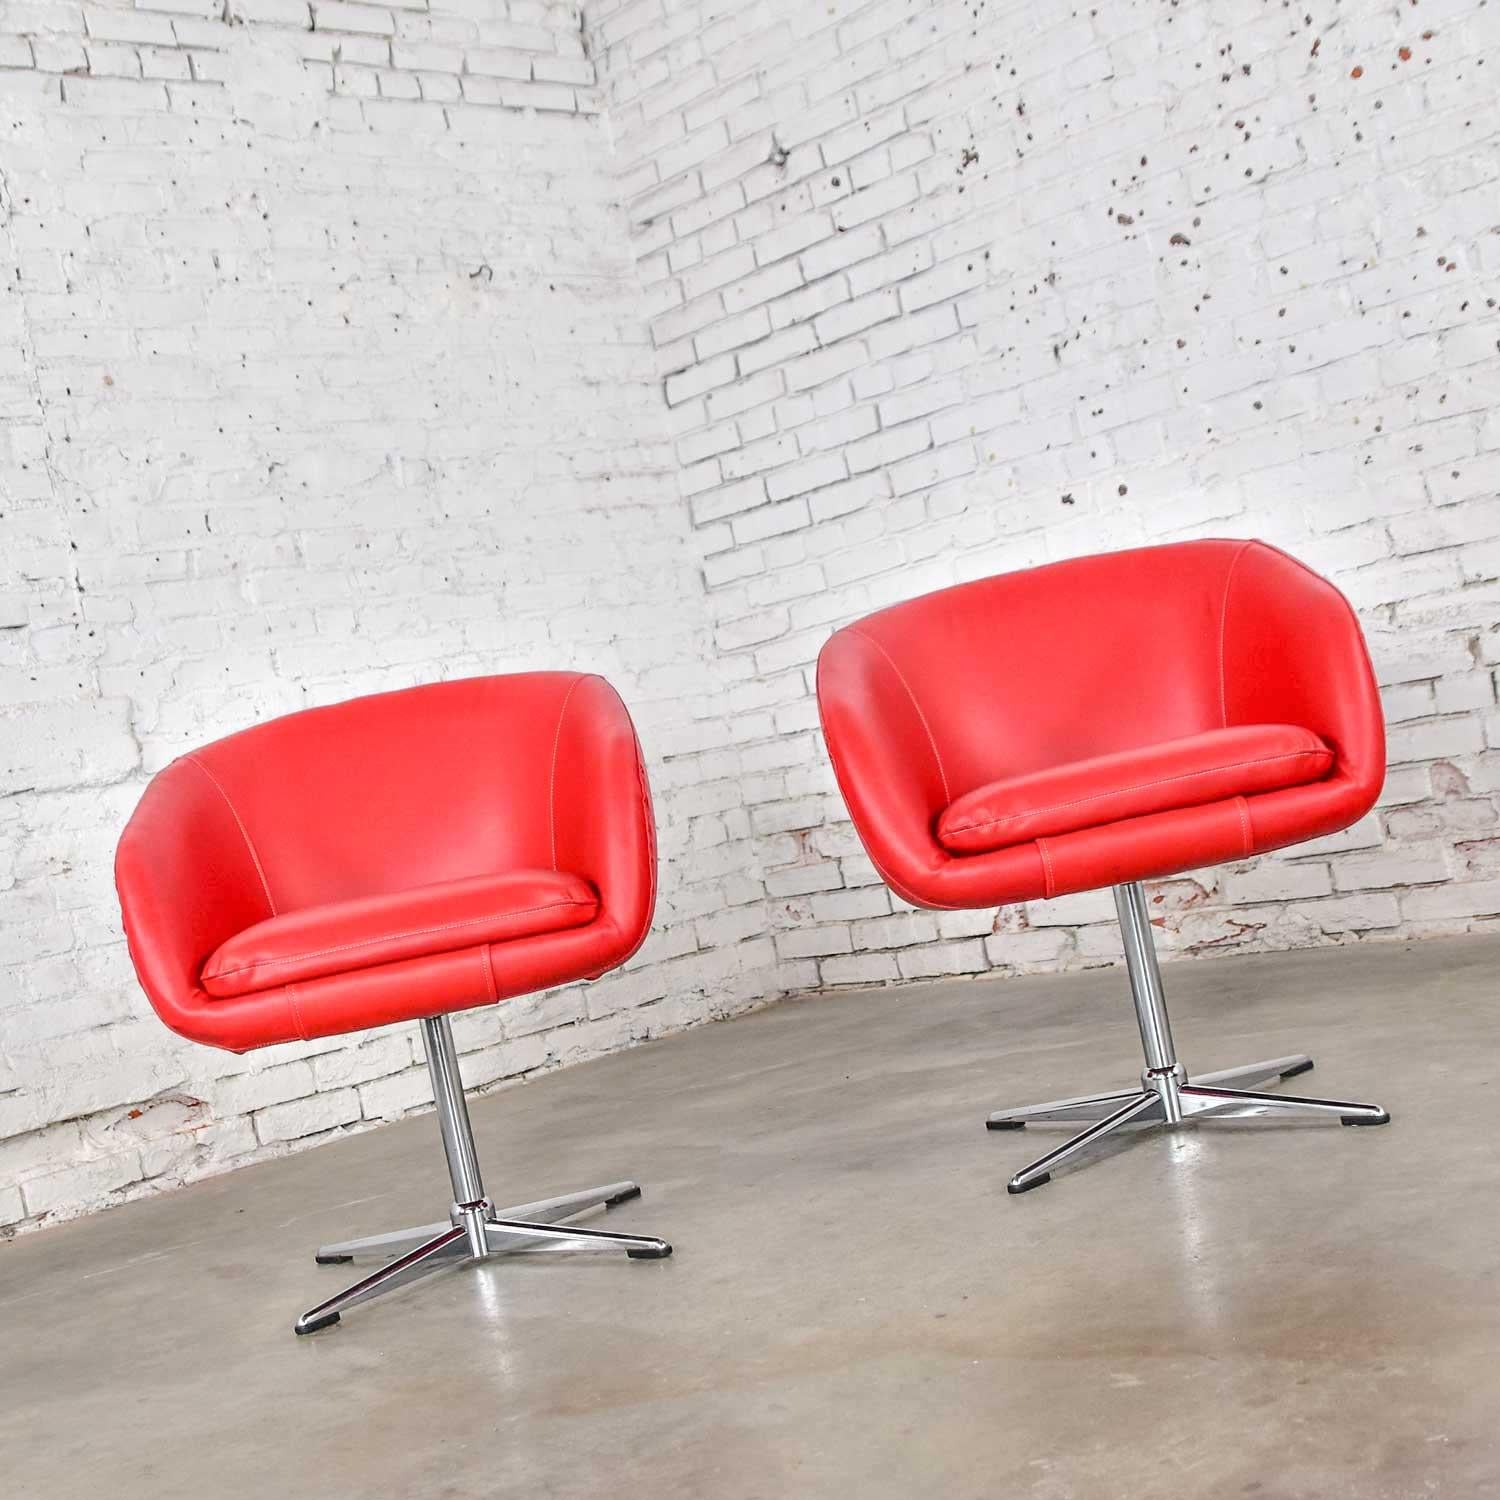 Awesome pair of Shelby Williams Mid-Century Modern swivel bucket chairs with chrome X base. Newly upholstered in bright red vinyl faux leather fabric. In beautiful vintage condition. Sadly, they were tagged when we purchased them, but the